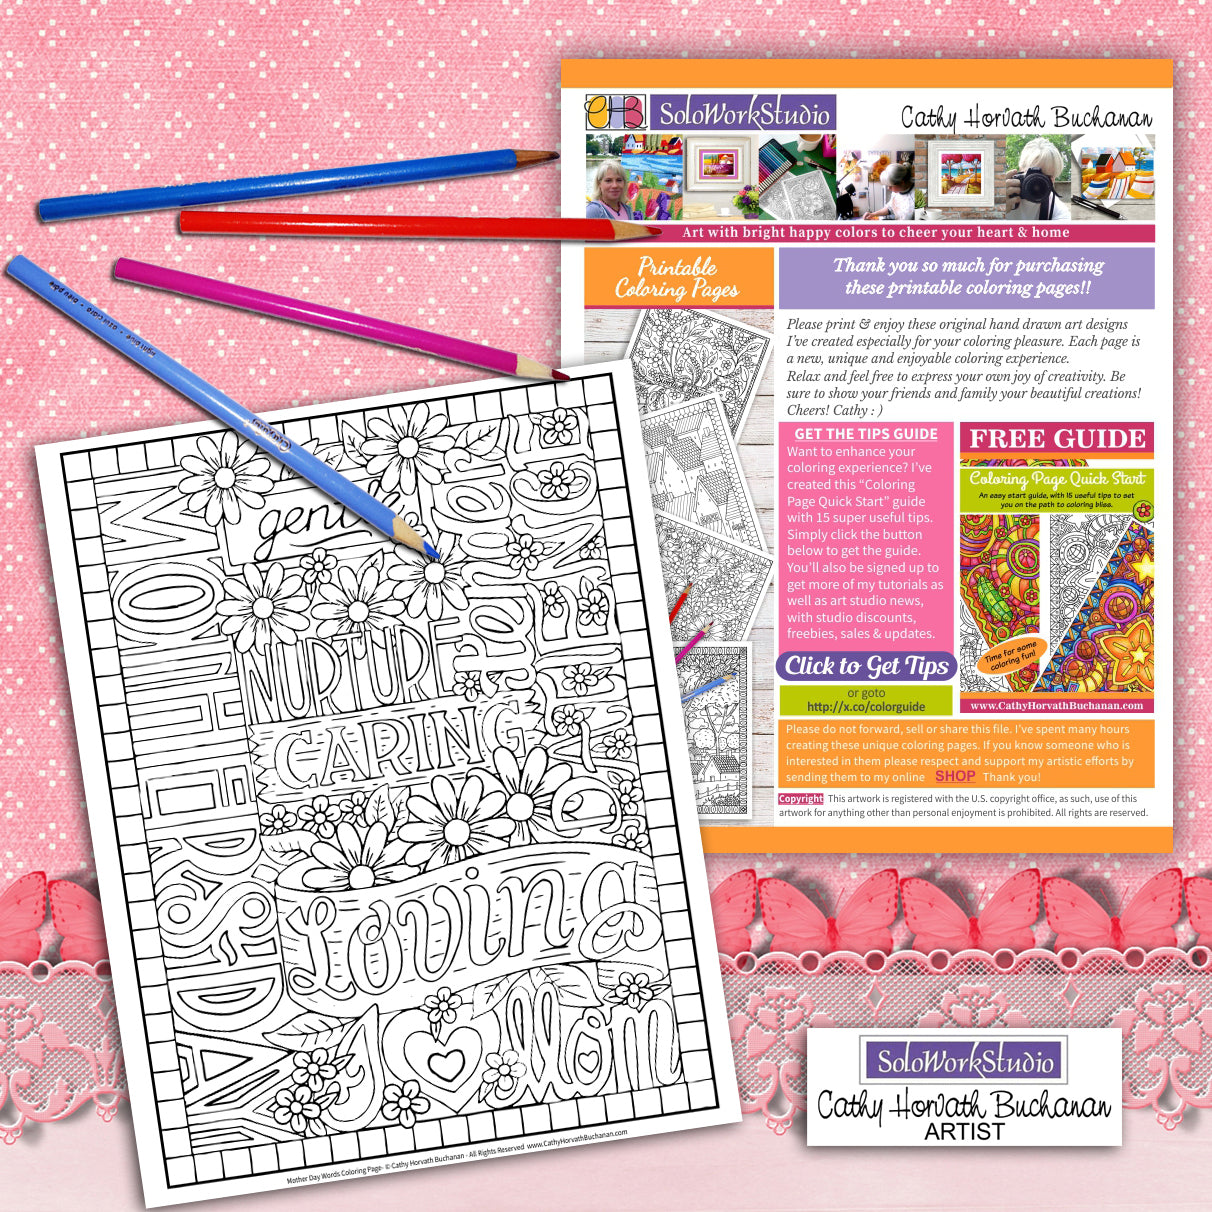 mothers day coloring page printout with pencil crayons artist Cathy Horvath Buchanan